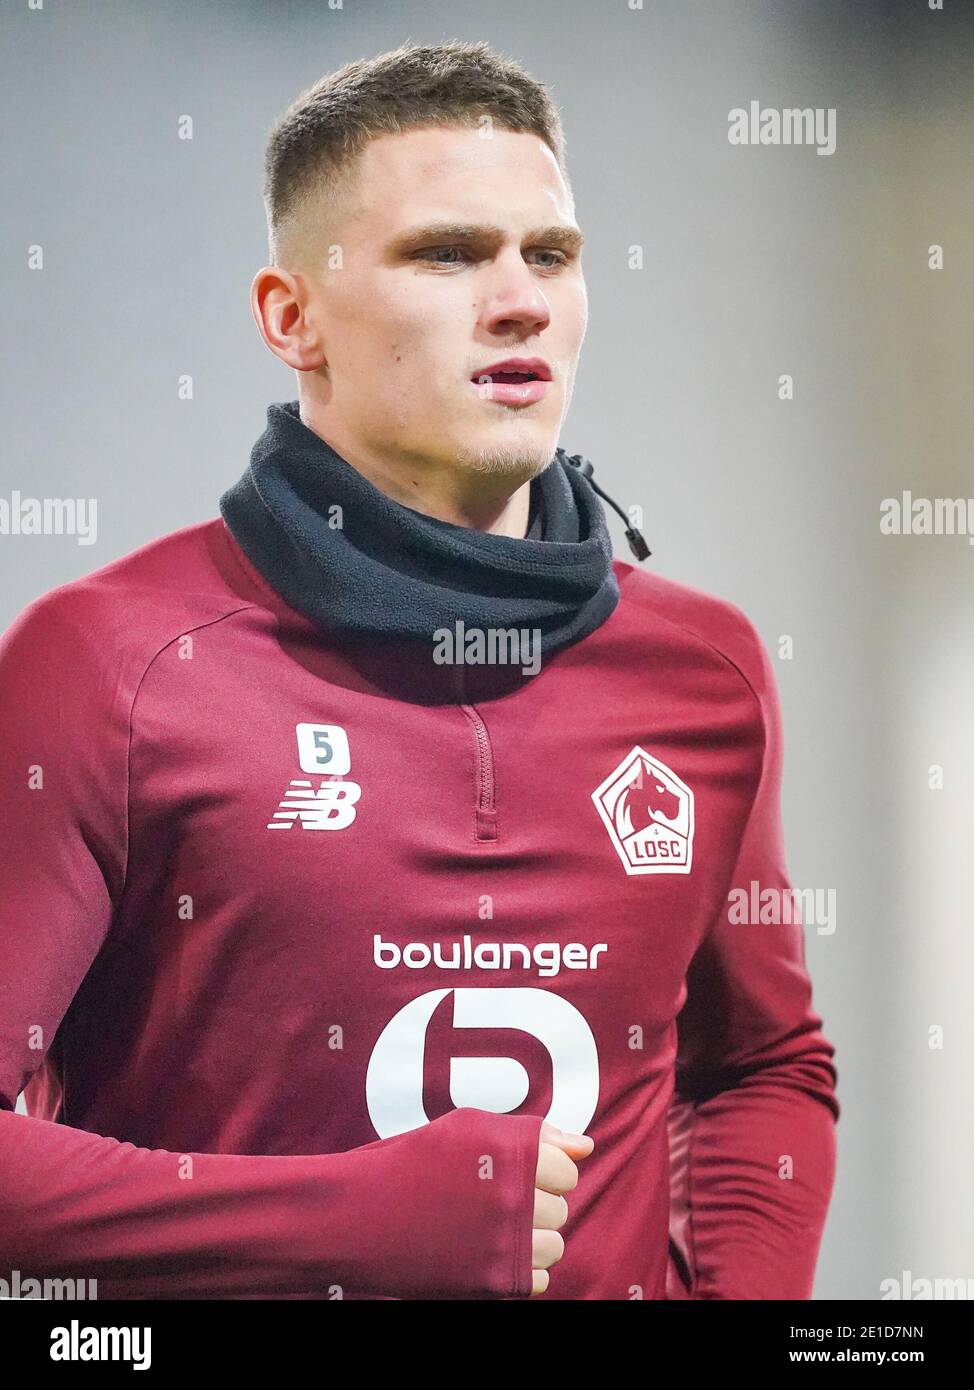 LILLE, FRANCE - JANUARY 6: Sven Botman of Lille OSC before the Ligue 1 match between Lille OSC and Angers SCO at Stade Pierre Mauroy on January 6, 2021 in Lille, France (Photo by Jeroen Meuwsen/BSR Agency/Alamy Live News)*** Local Caption *** Sven Botman Stock Photo